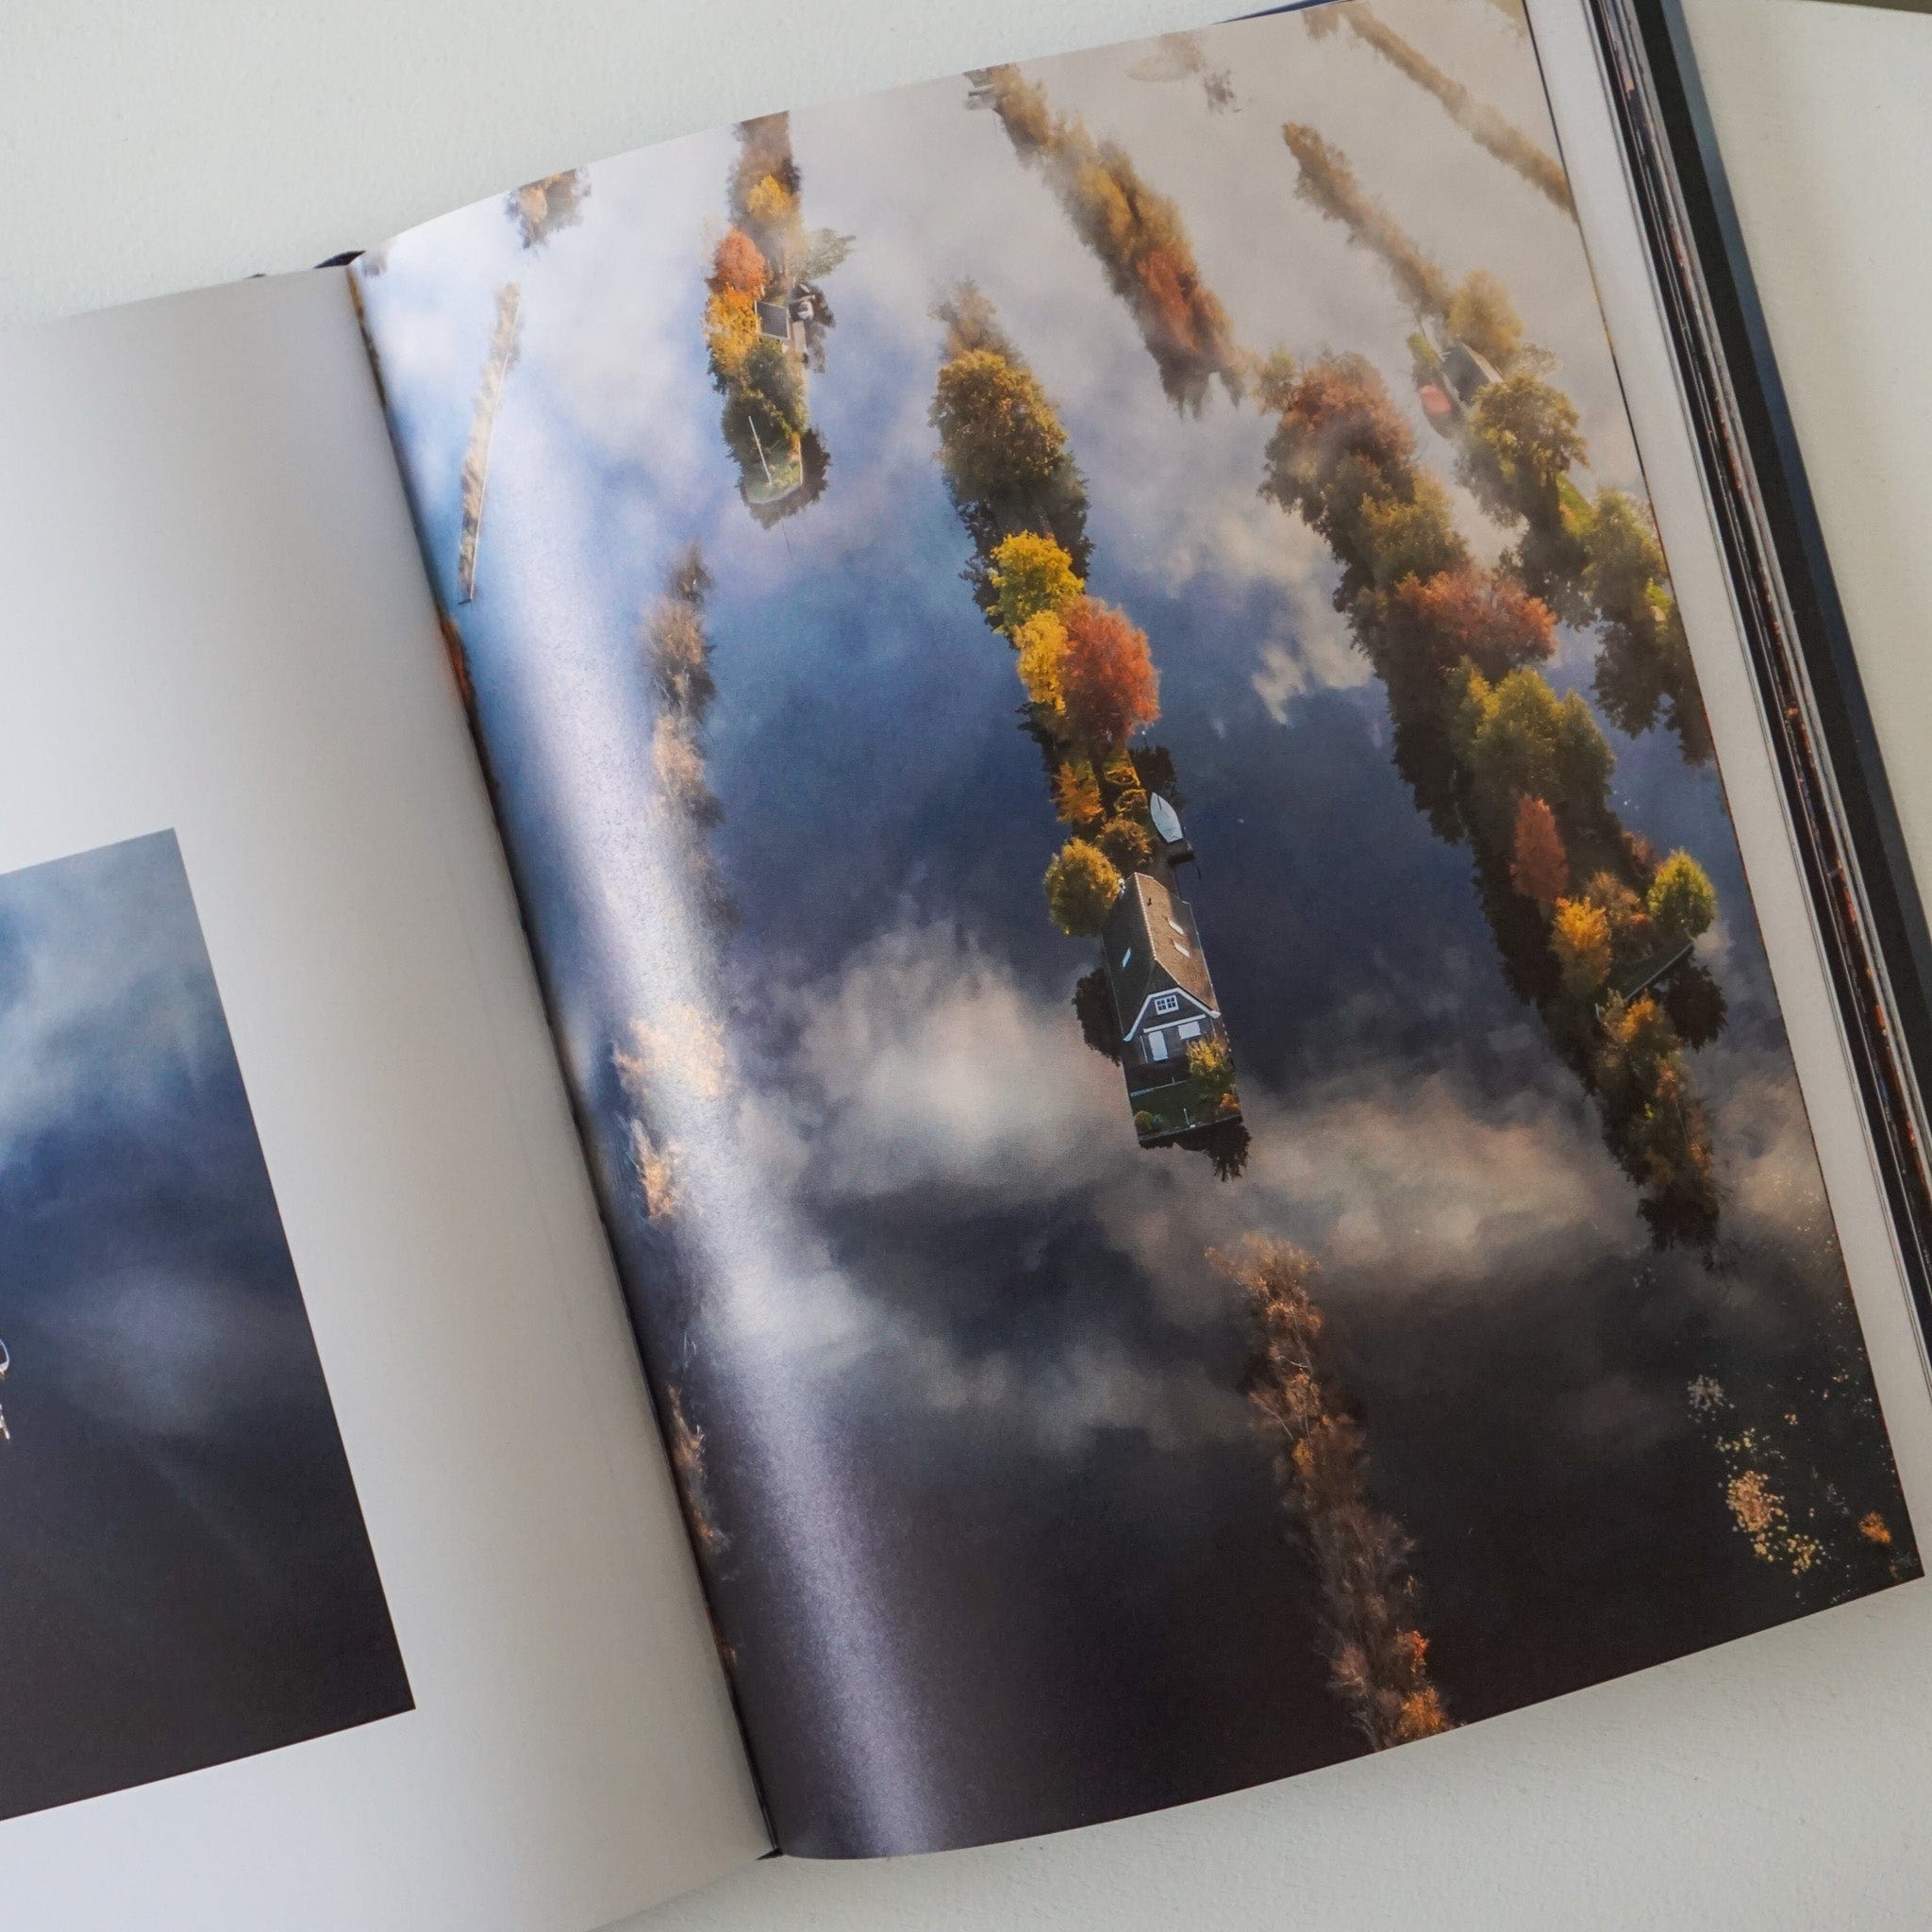 ACC Books MAN MADE: Aerial Views of Human Landscapes